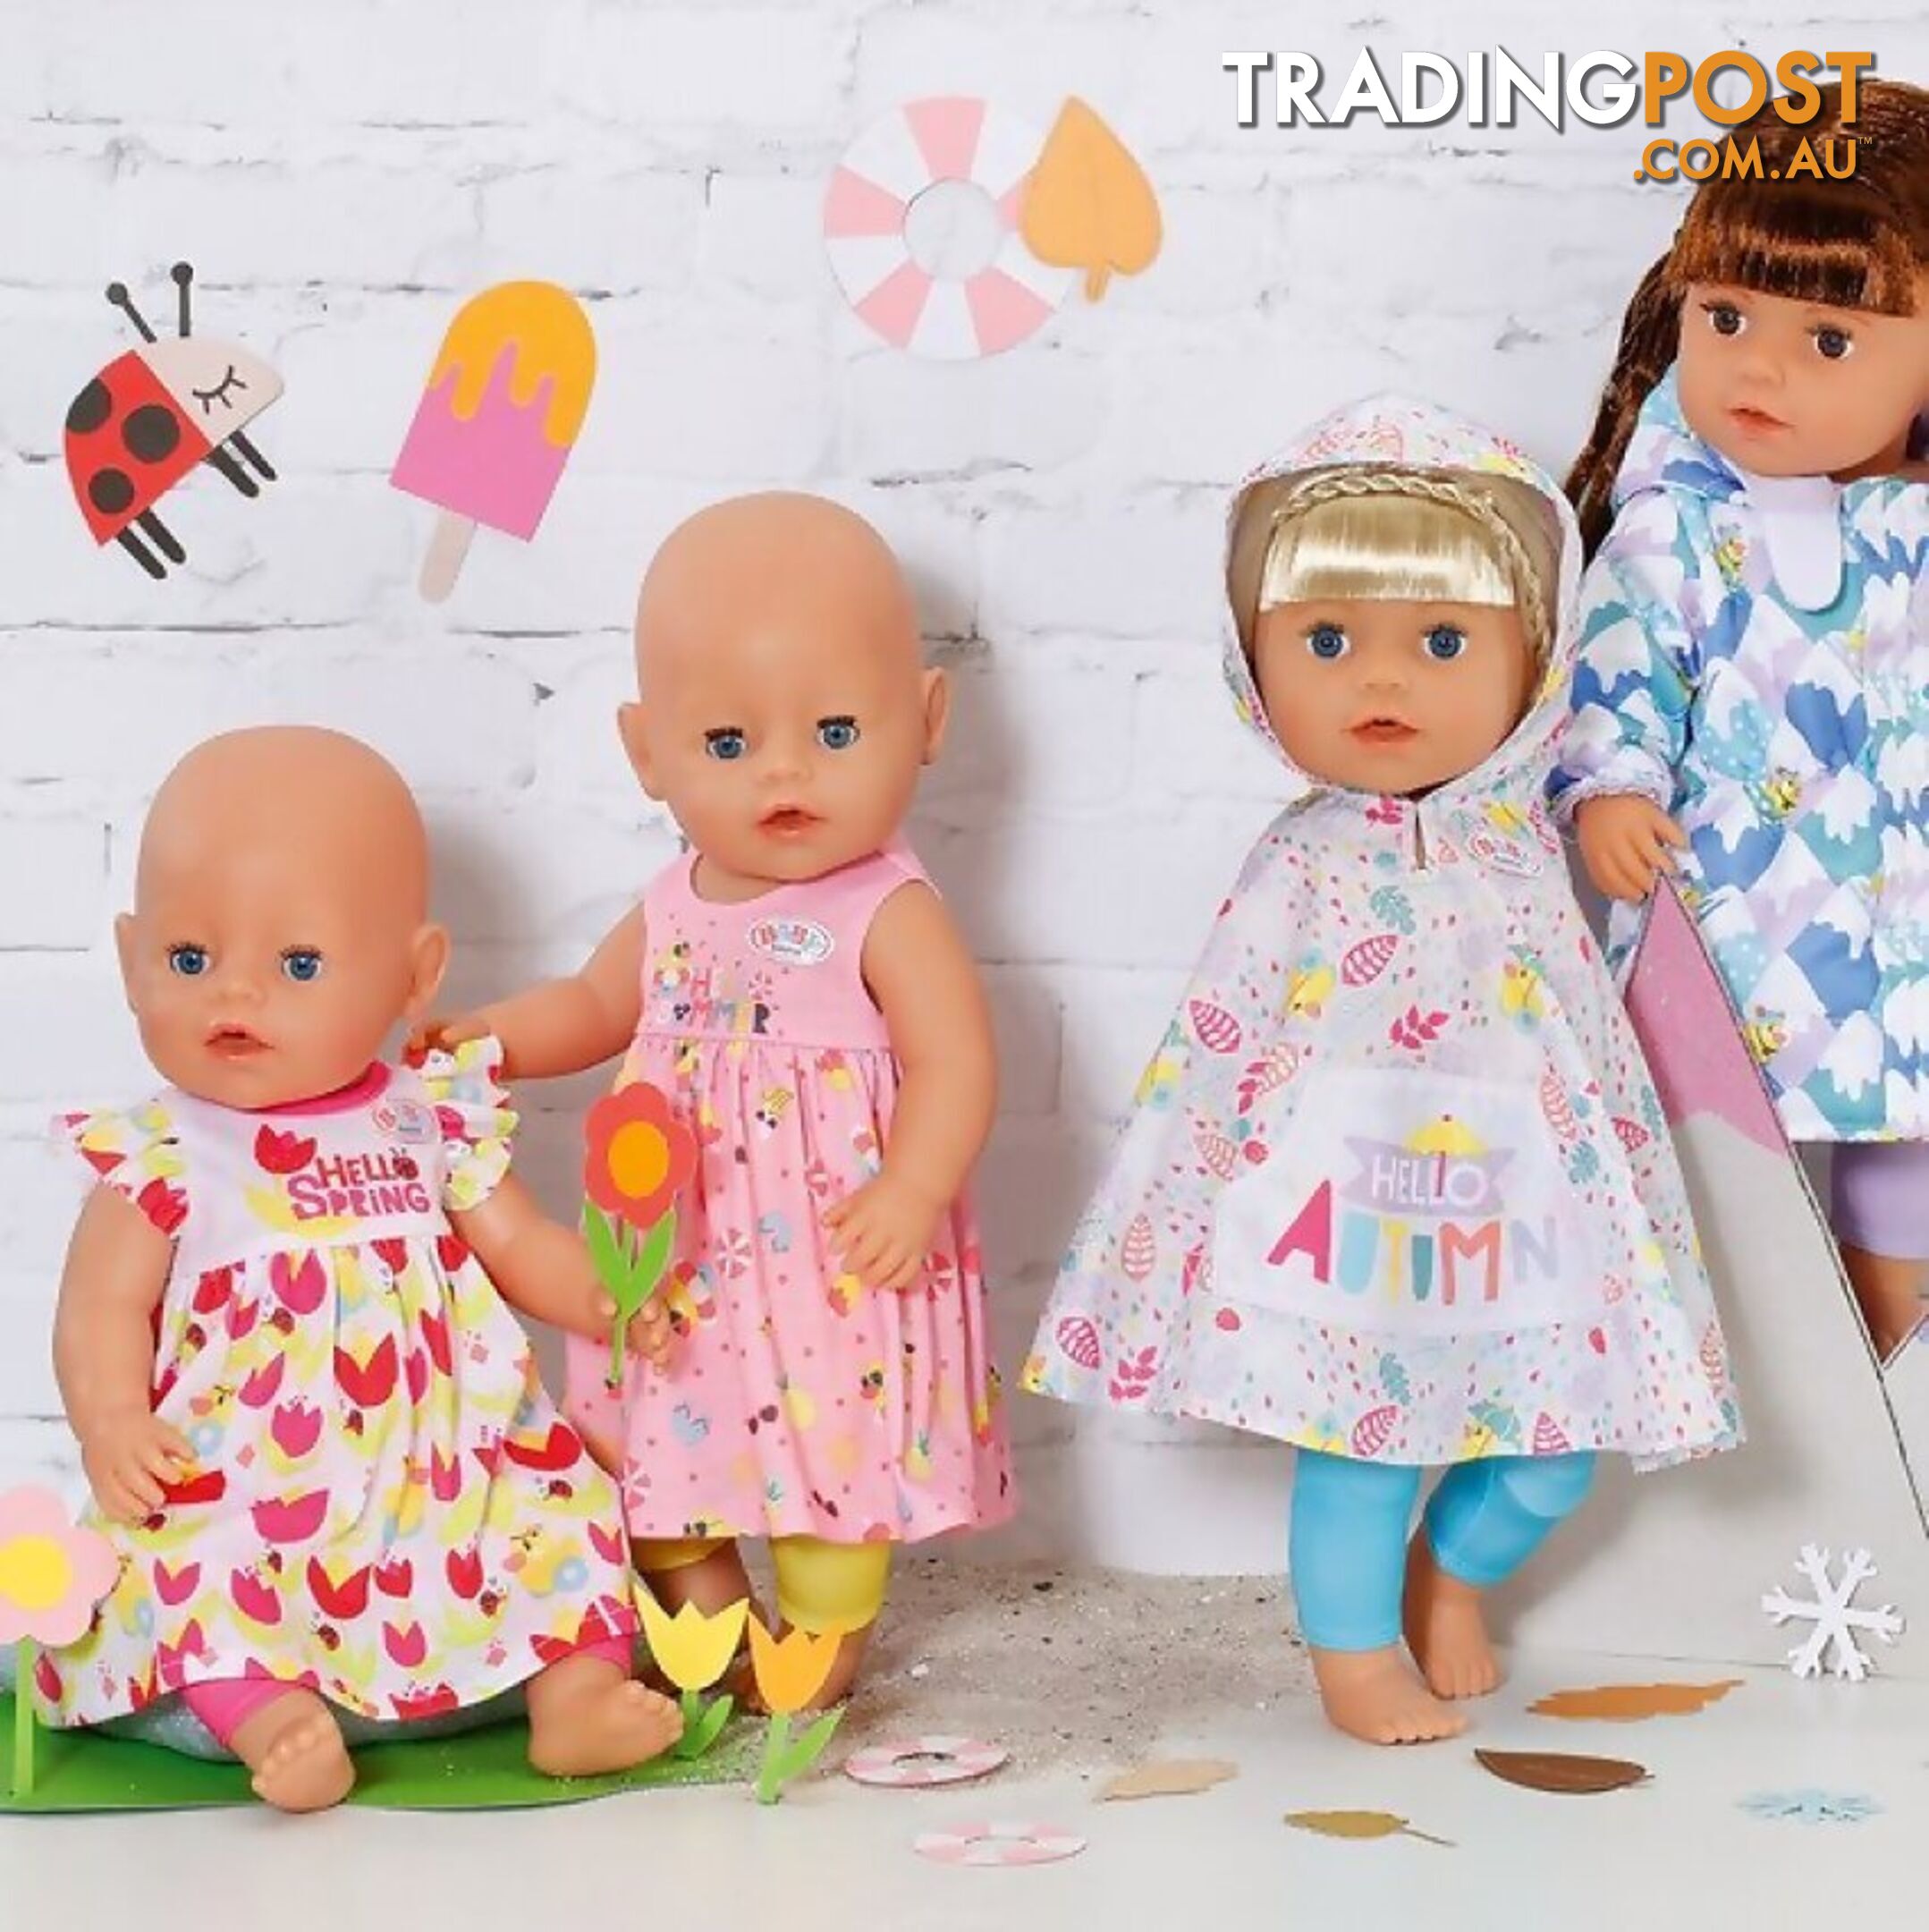 Baby Born - 4 Seasonal Outfit Set 43cm (dolls Not Included) - Bj829424 - 4001167829424